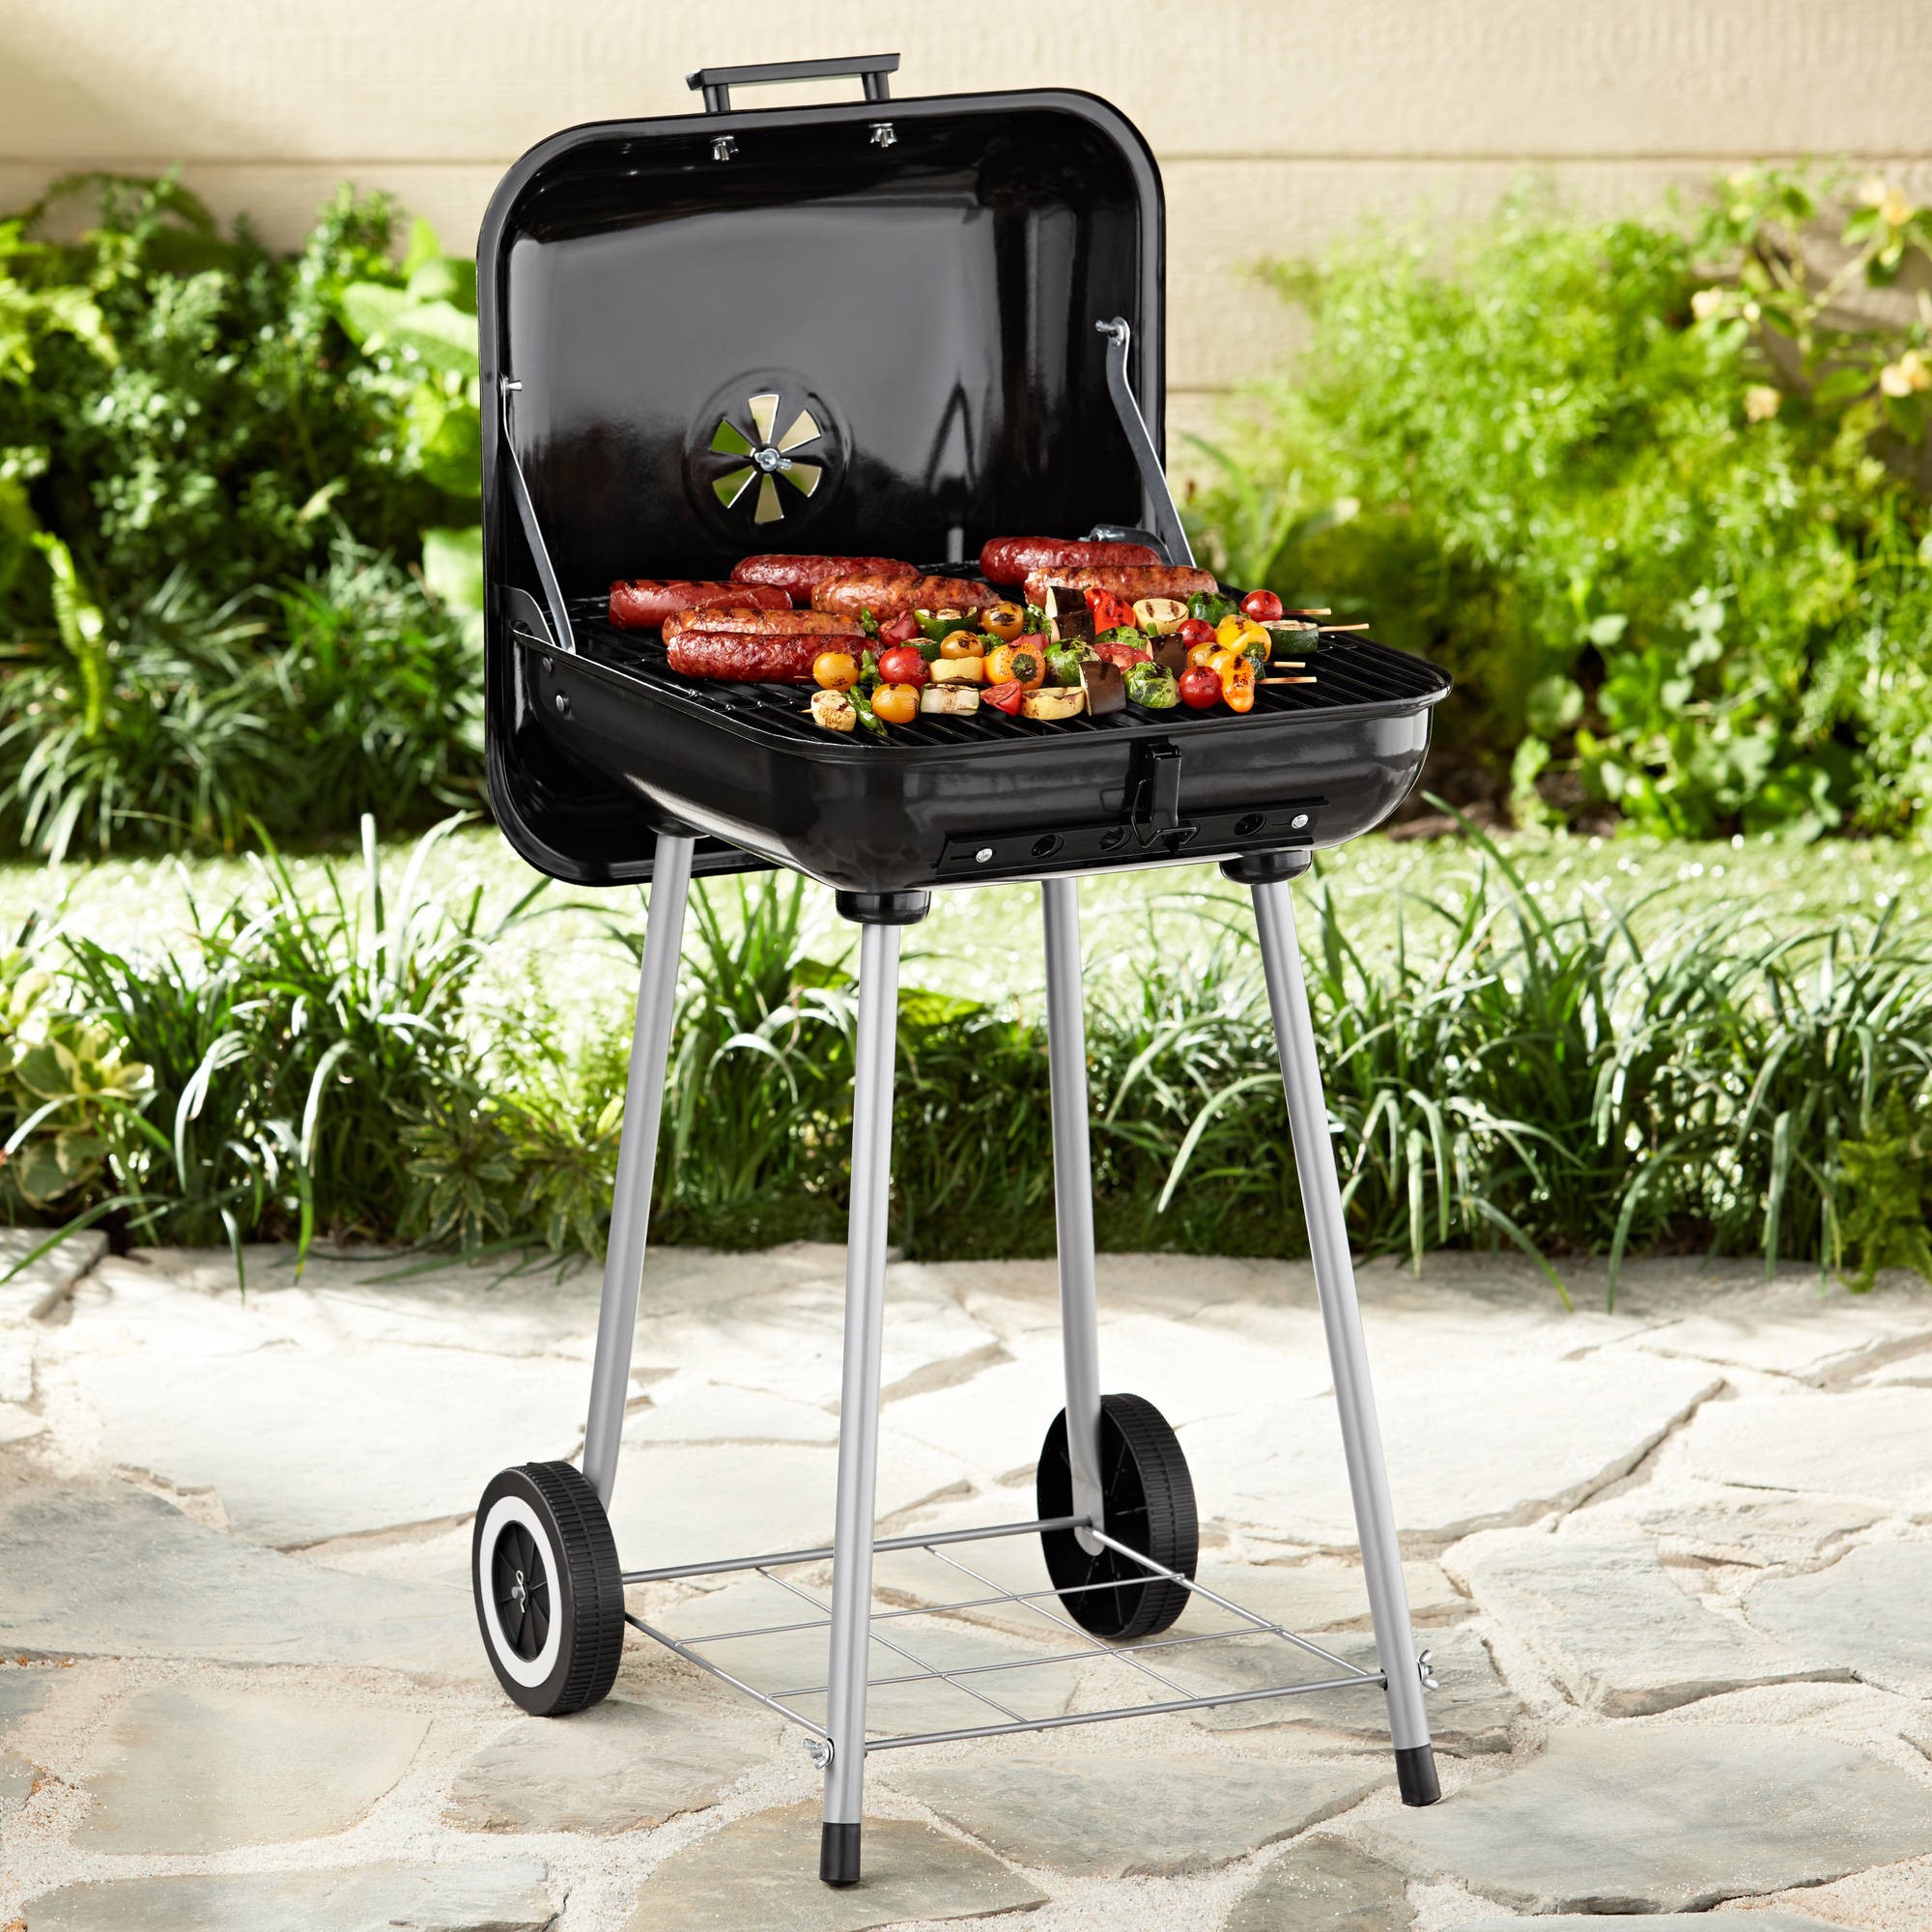 Expert Grill 17.5-inch charcoal grill for under $14